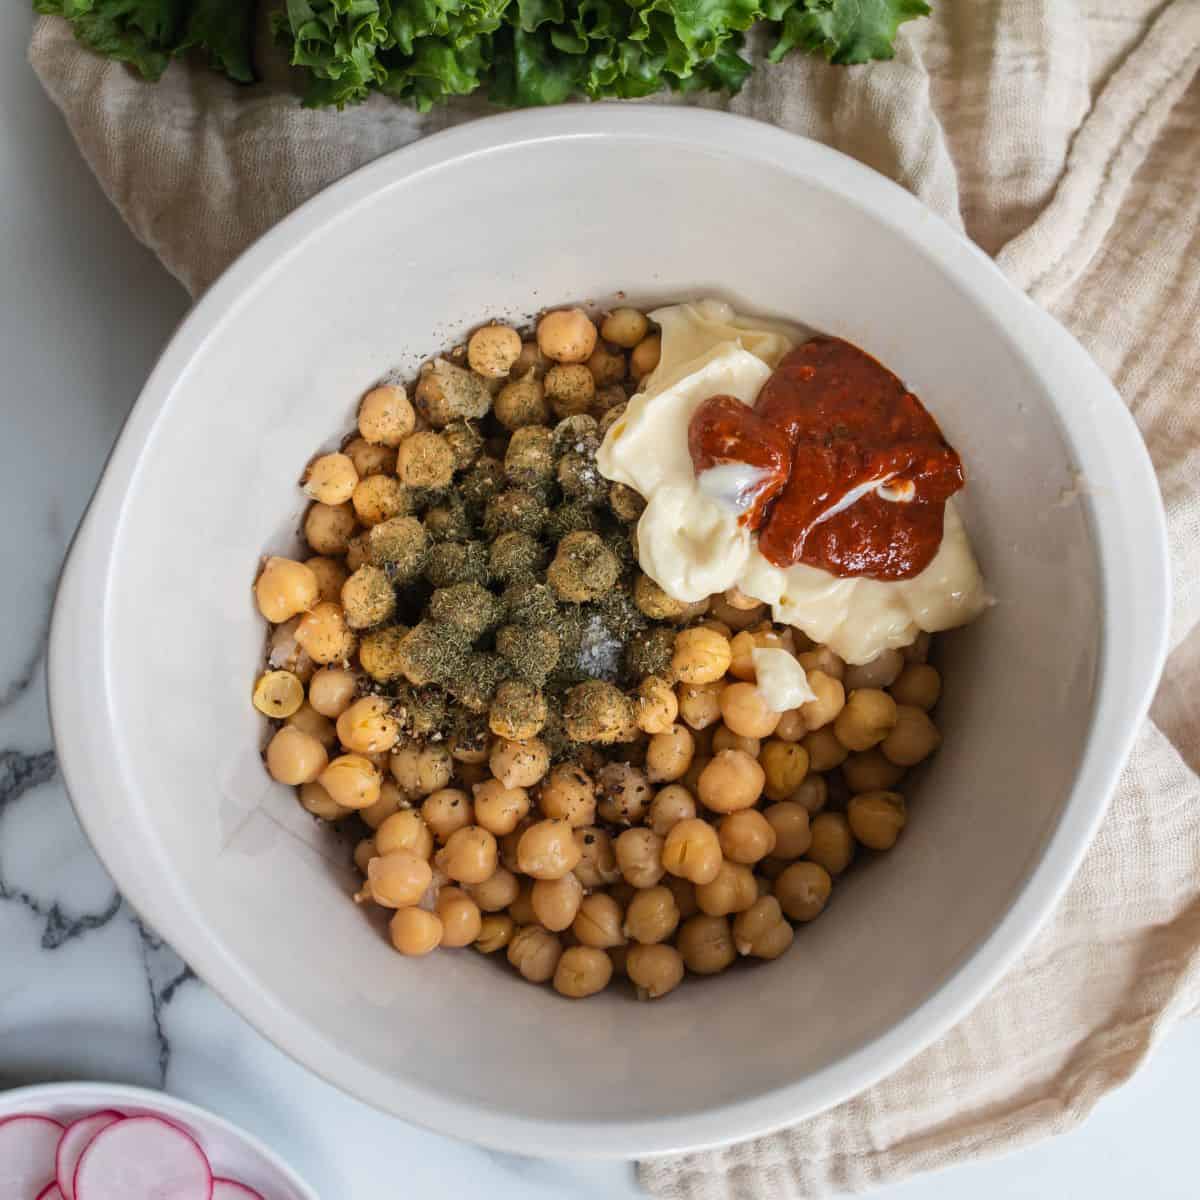 Chickpeas in a mixing bowl with spices, mayo and harissa on top.